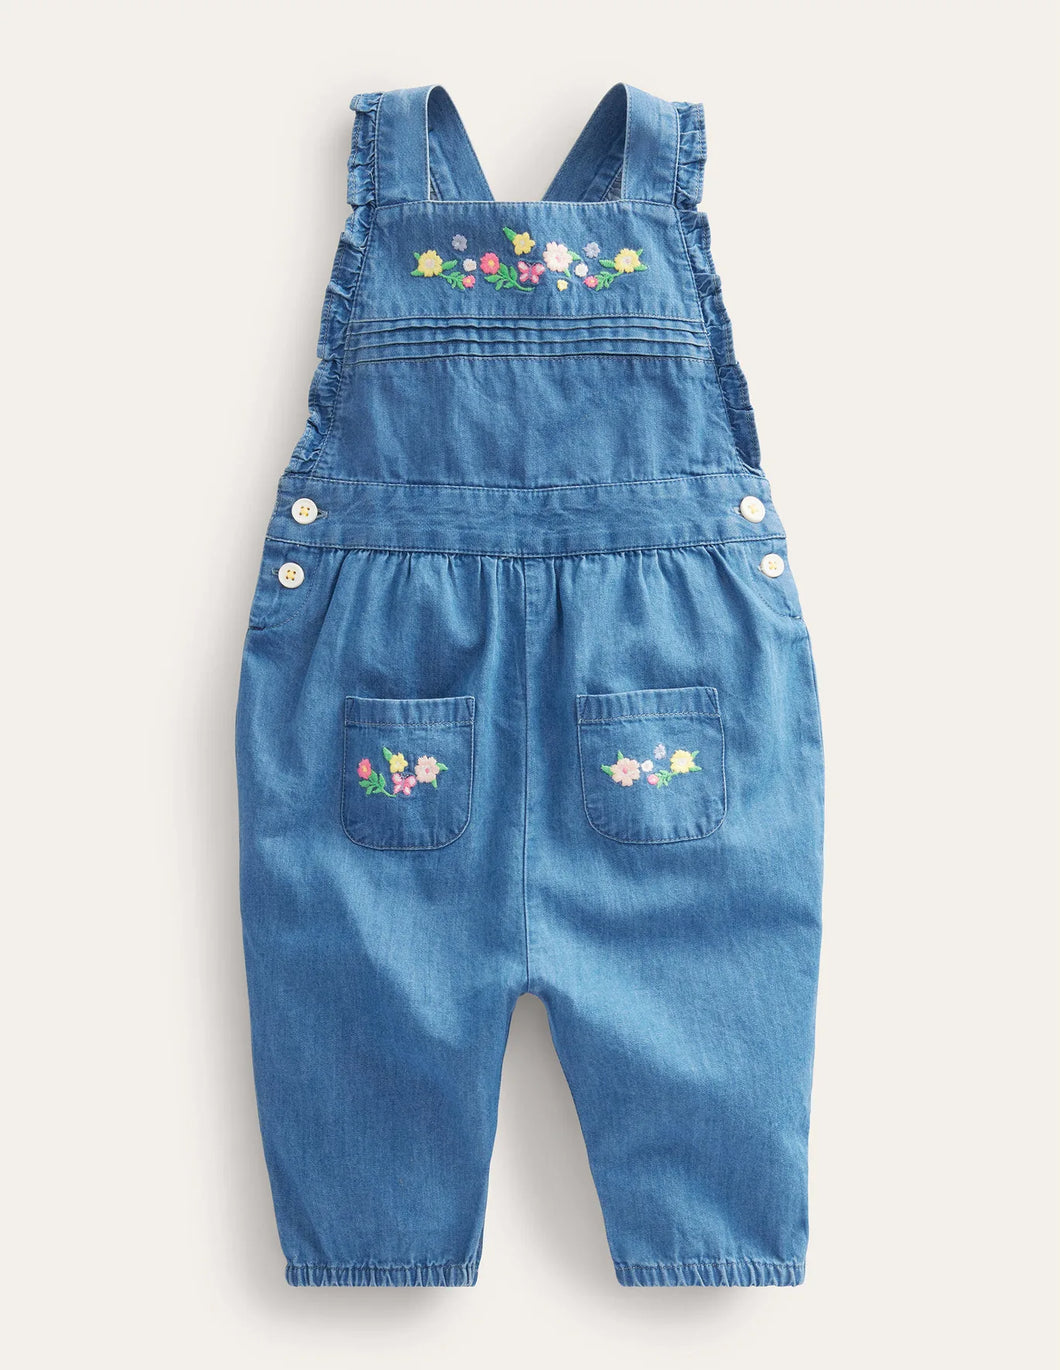 NWT Mini Boden Embroidered Woven Dungaree